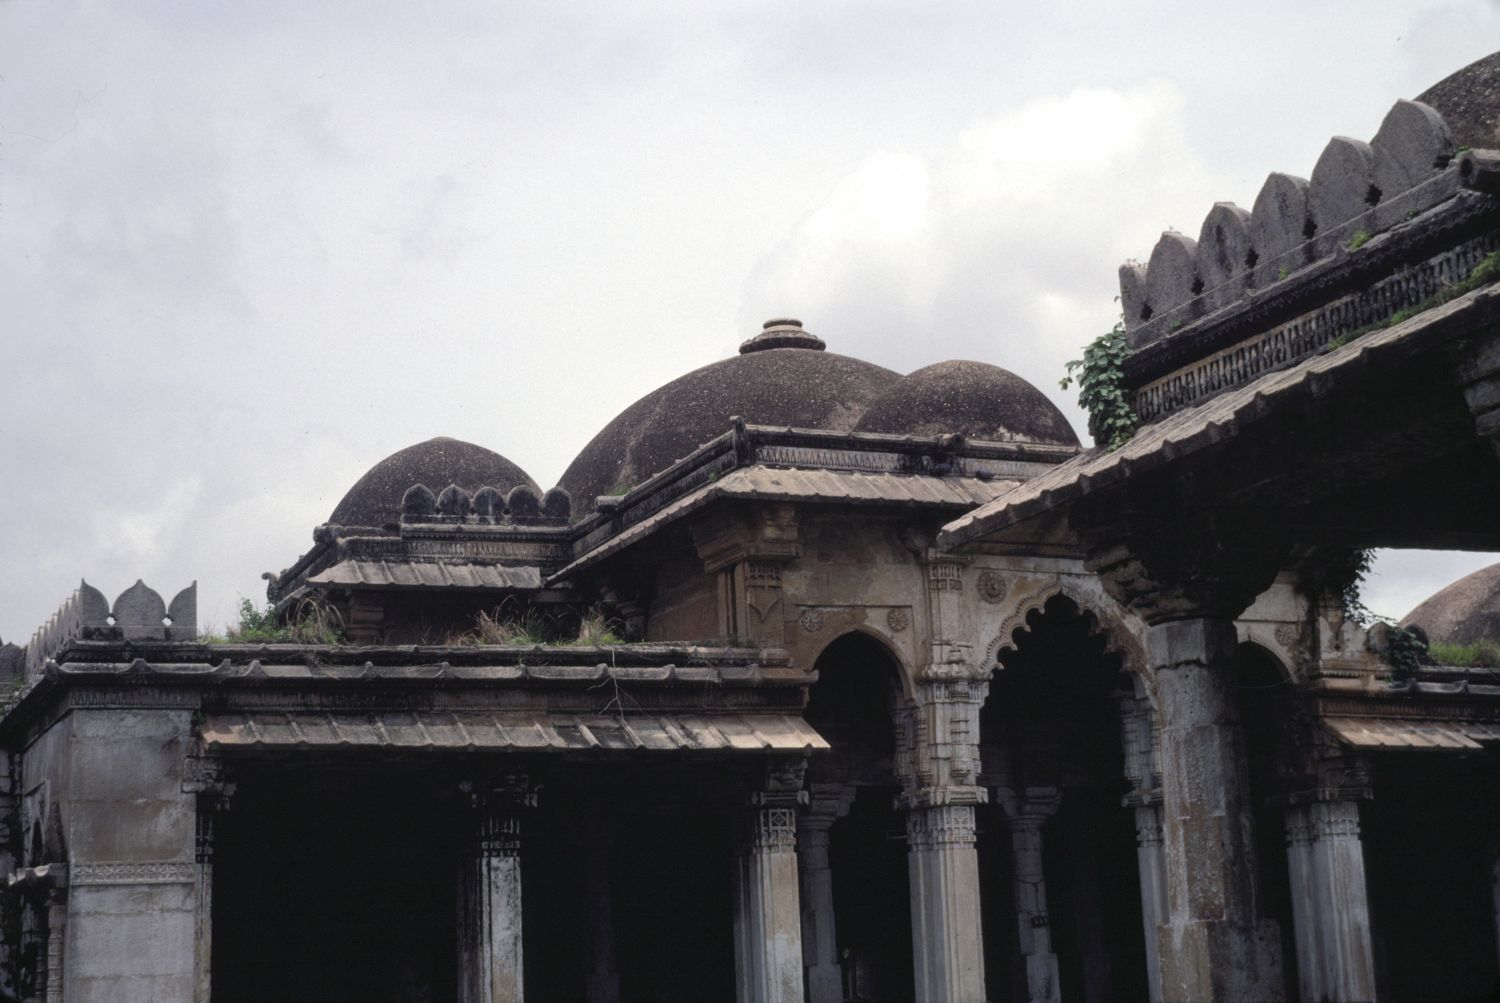 View of prayer hall facade from courtyard.